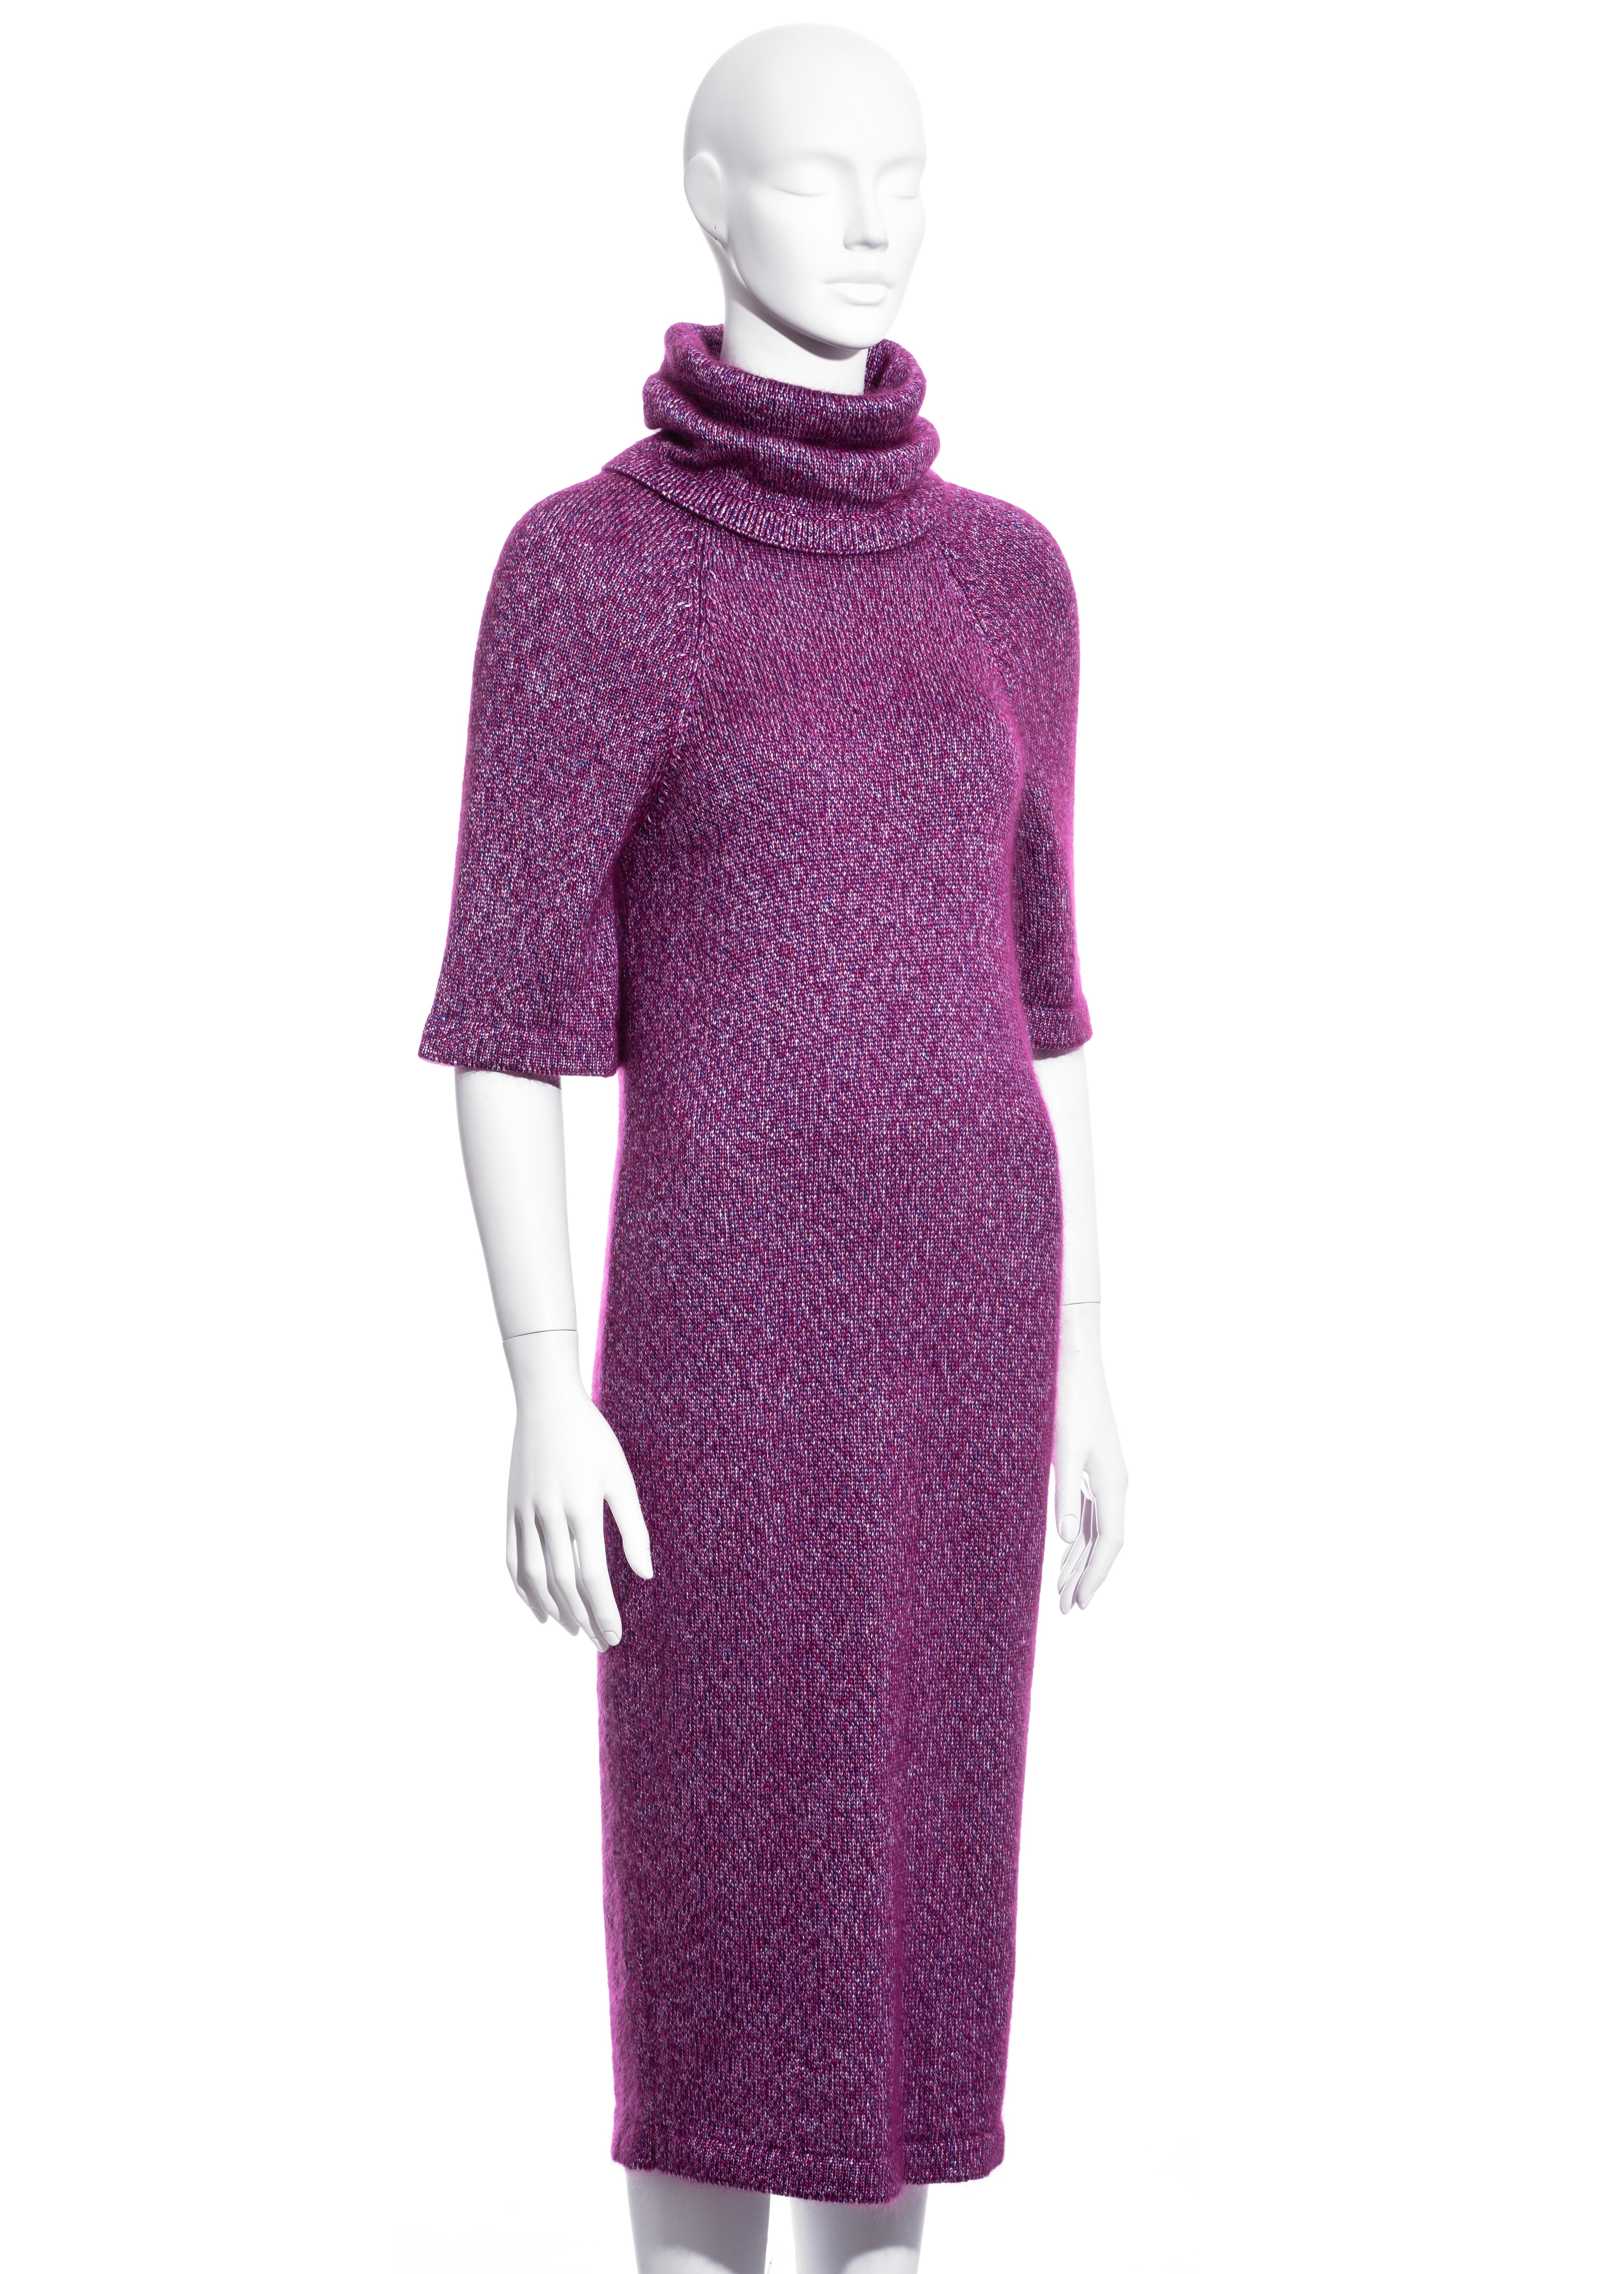 ▪ Chanel fuchsia knitted sweater dress
▪ Designed by Karl Lagerfeld 
▪ 79% Silk, 21% Mohair 
▪ Extra long turtle-neck 
▪ FR 36 - UK 8 - US 4
▪ Fall-Winter 2015